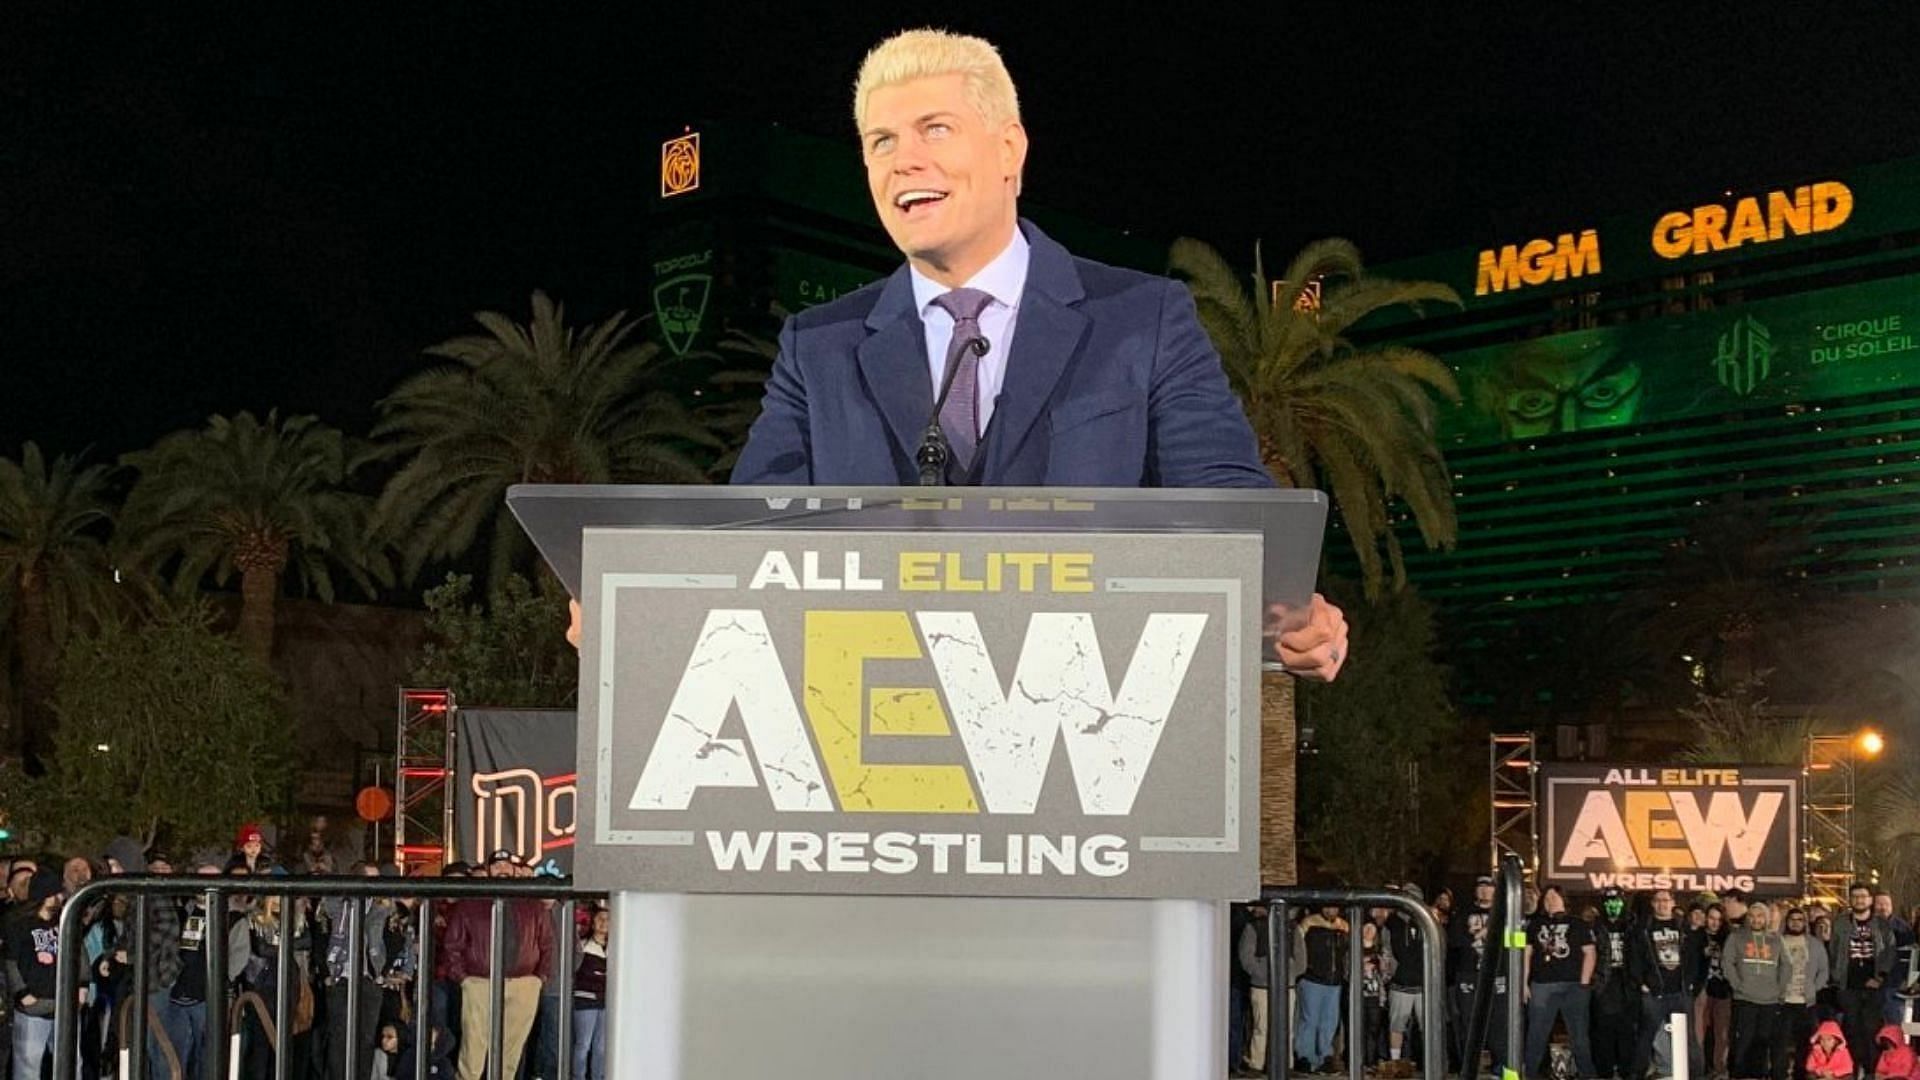 Cody Rhodes has departed the company he helped build